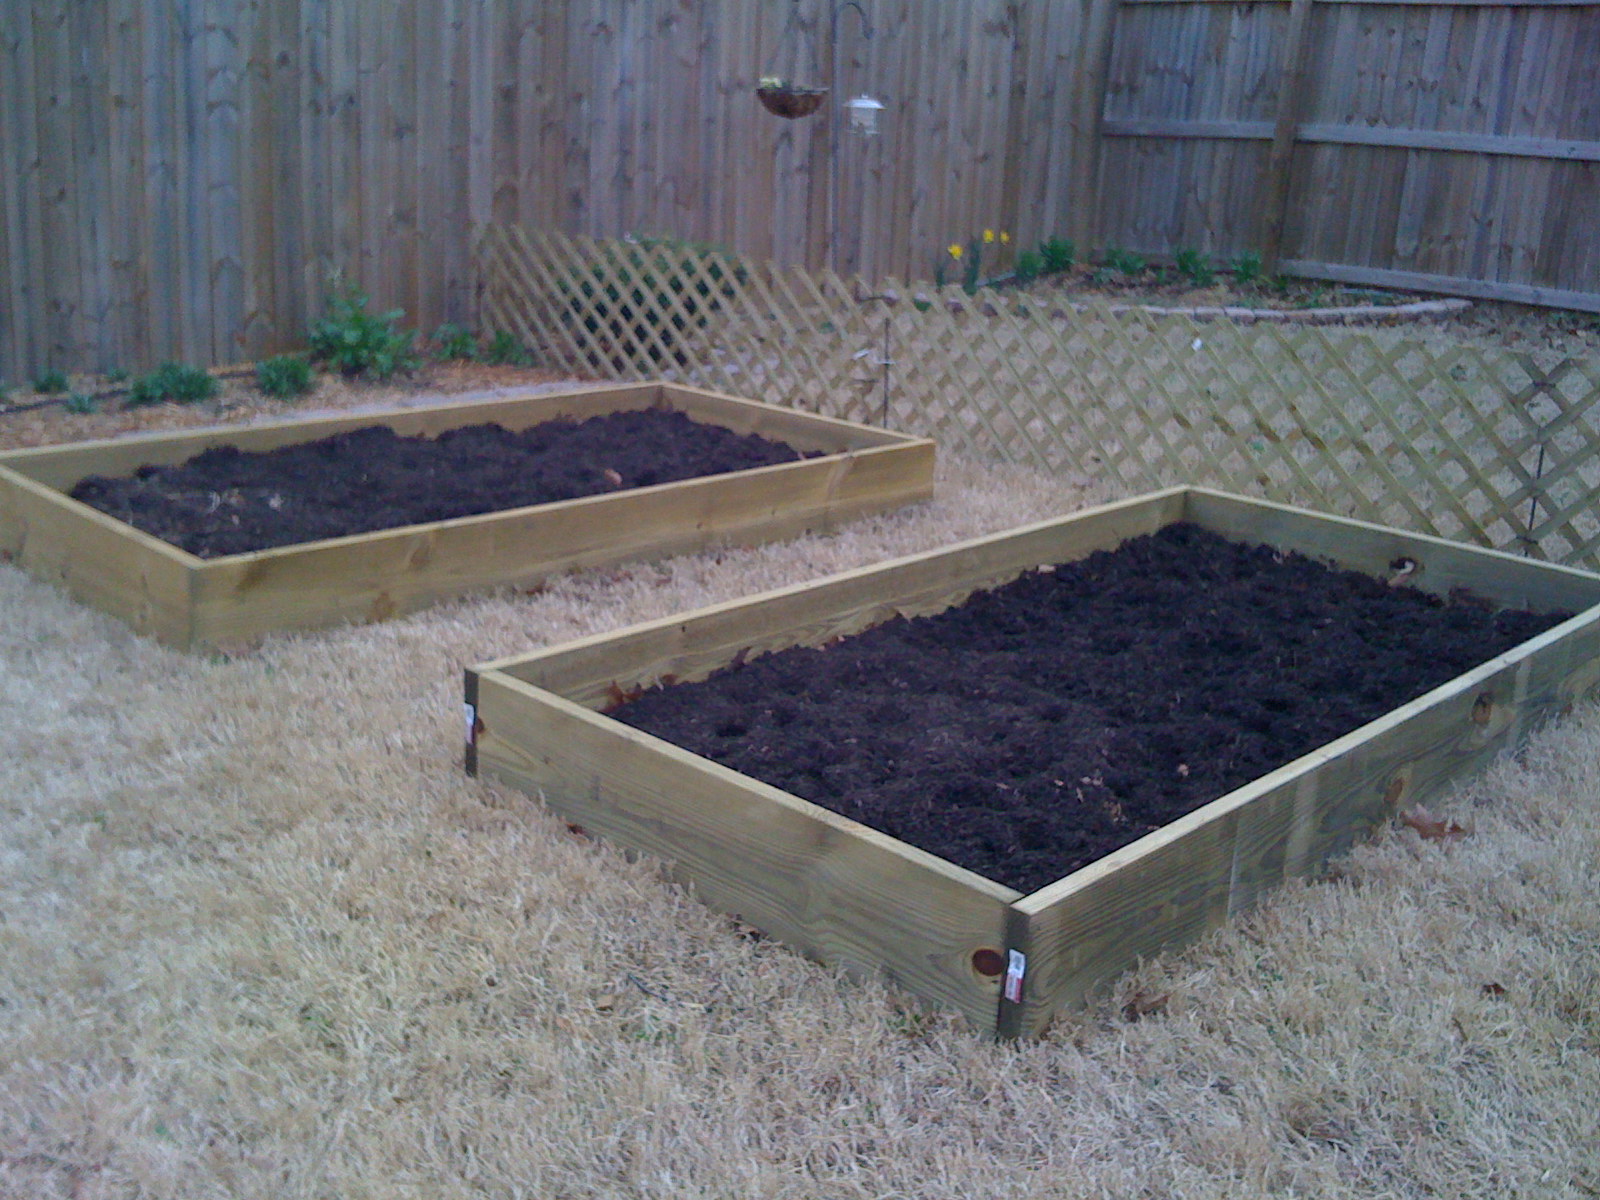 Two Raised Beds on the Right